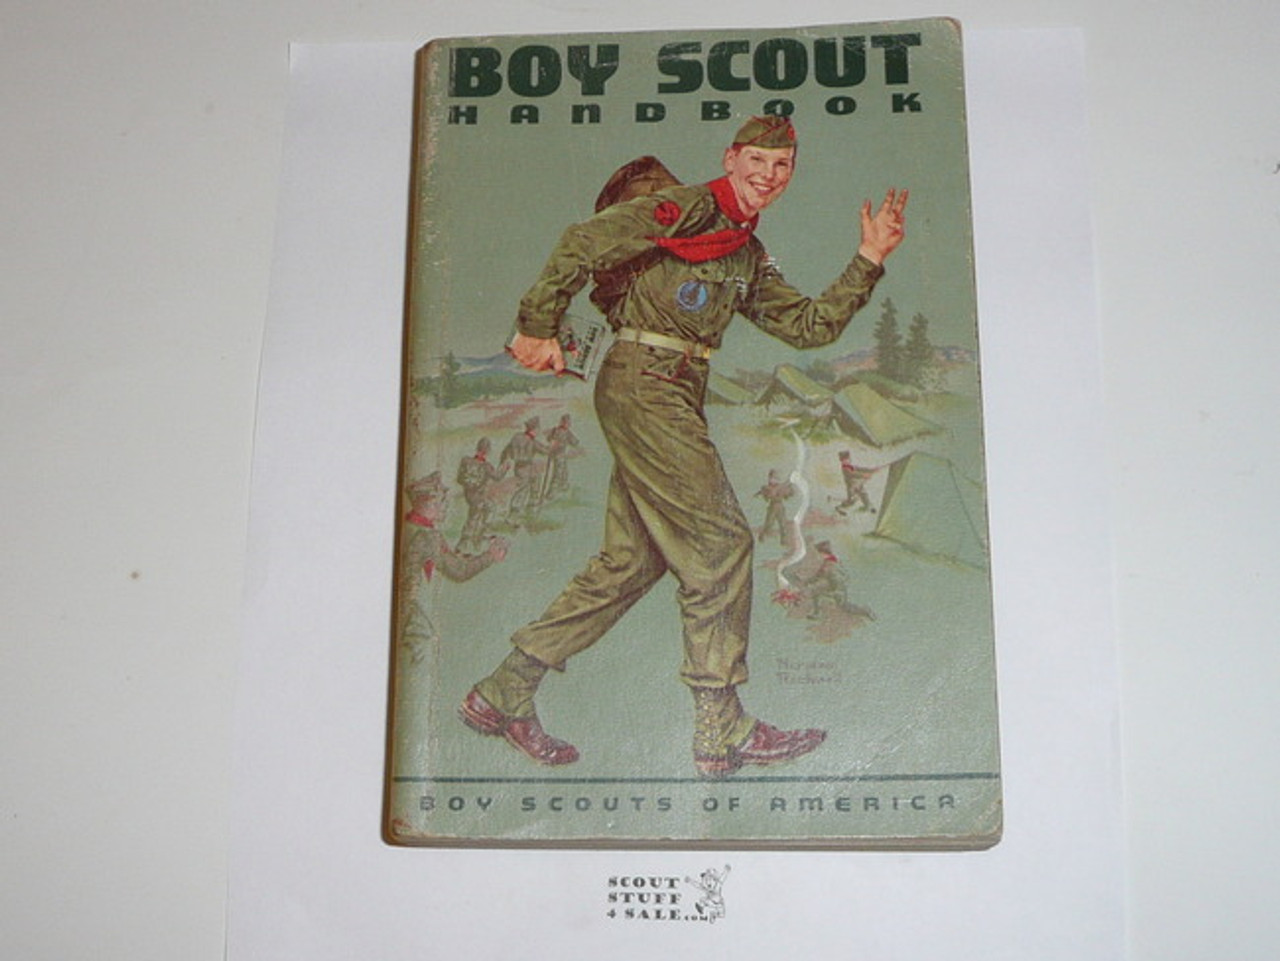 1961 Boy Scout Handbook, Sixth Edition, Third Printing, MINT condition, Norman Rockwell Cover